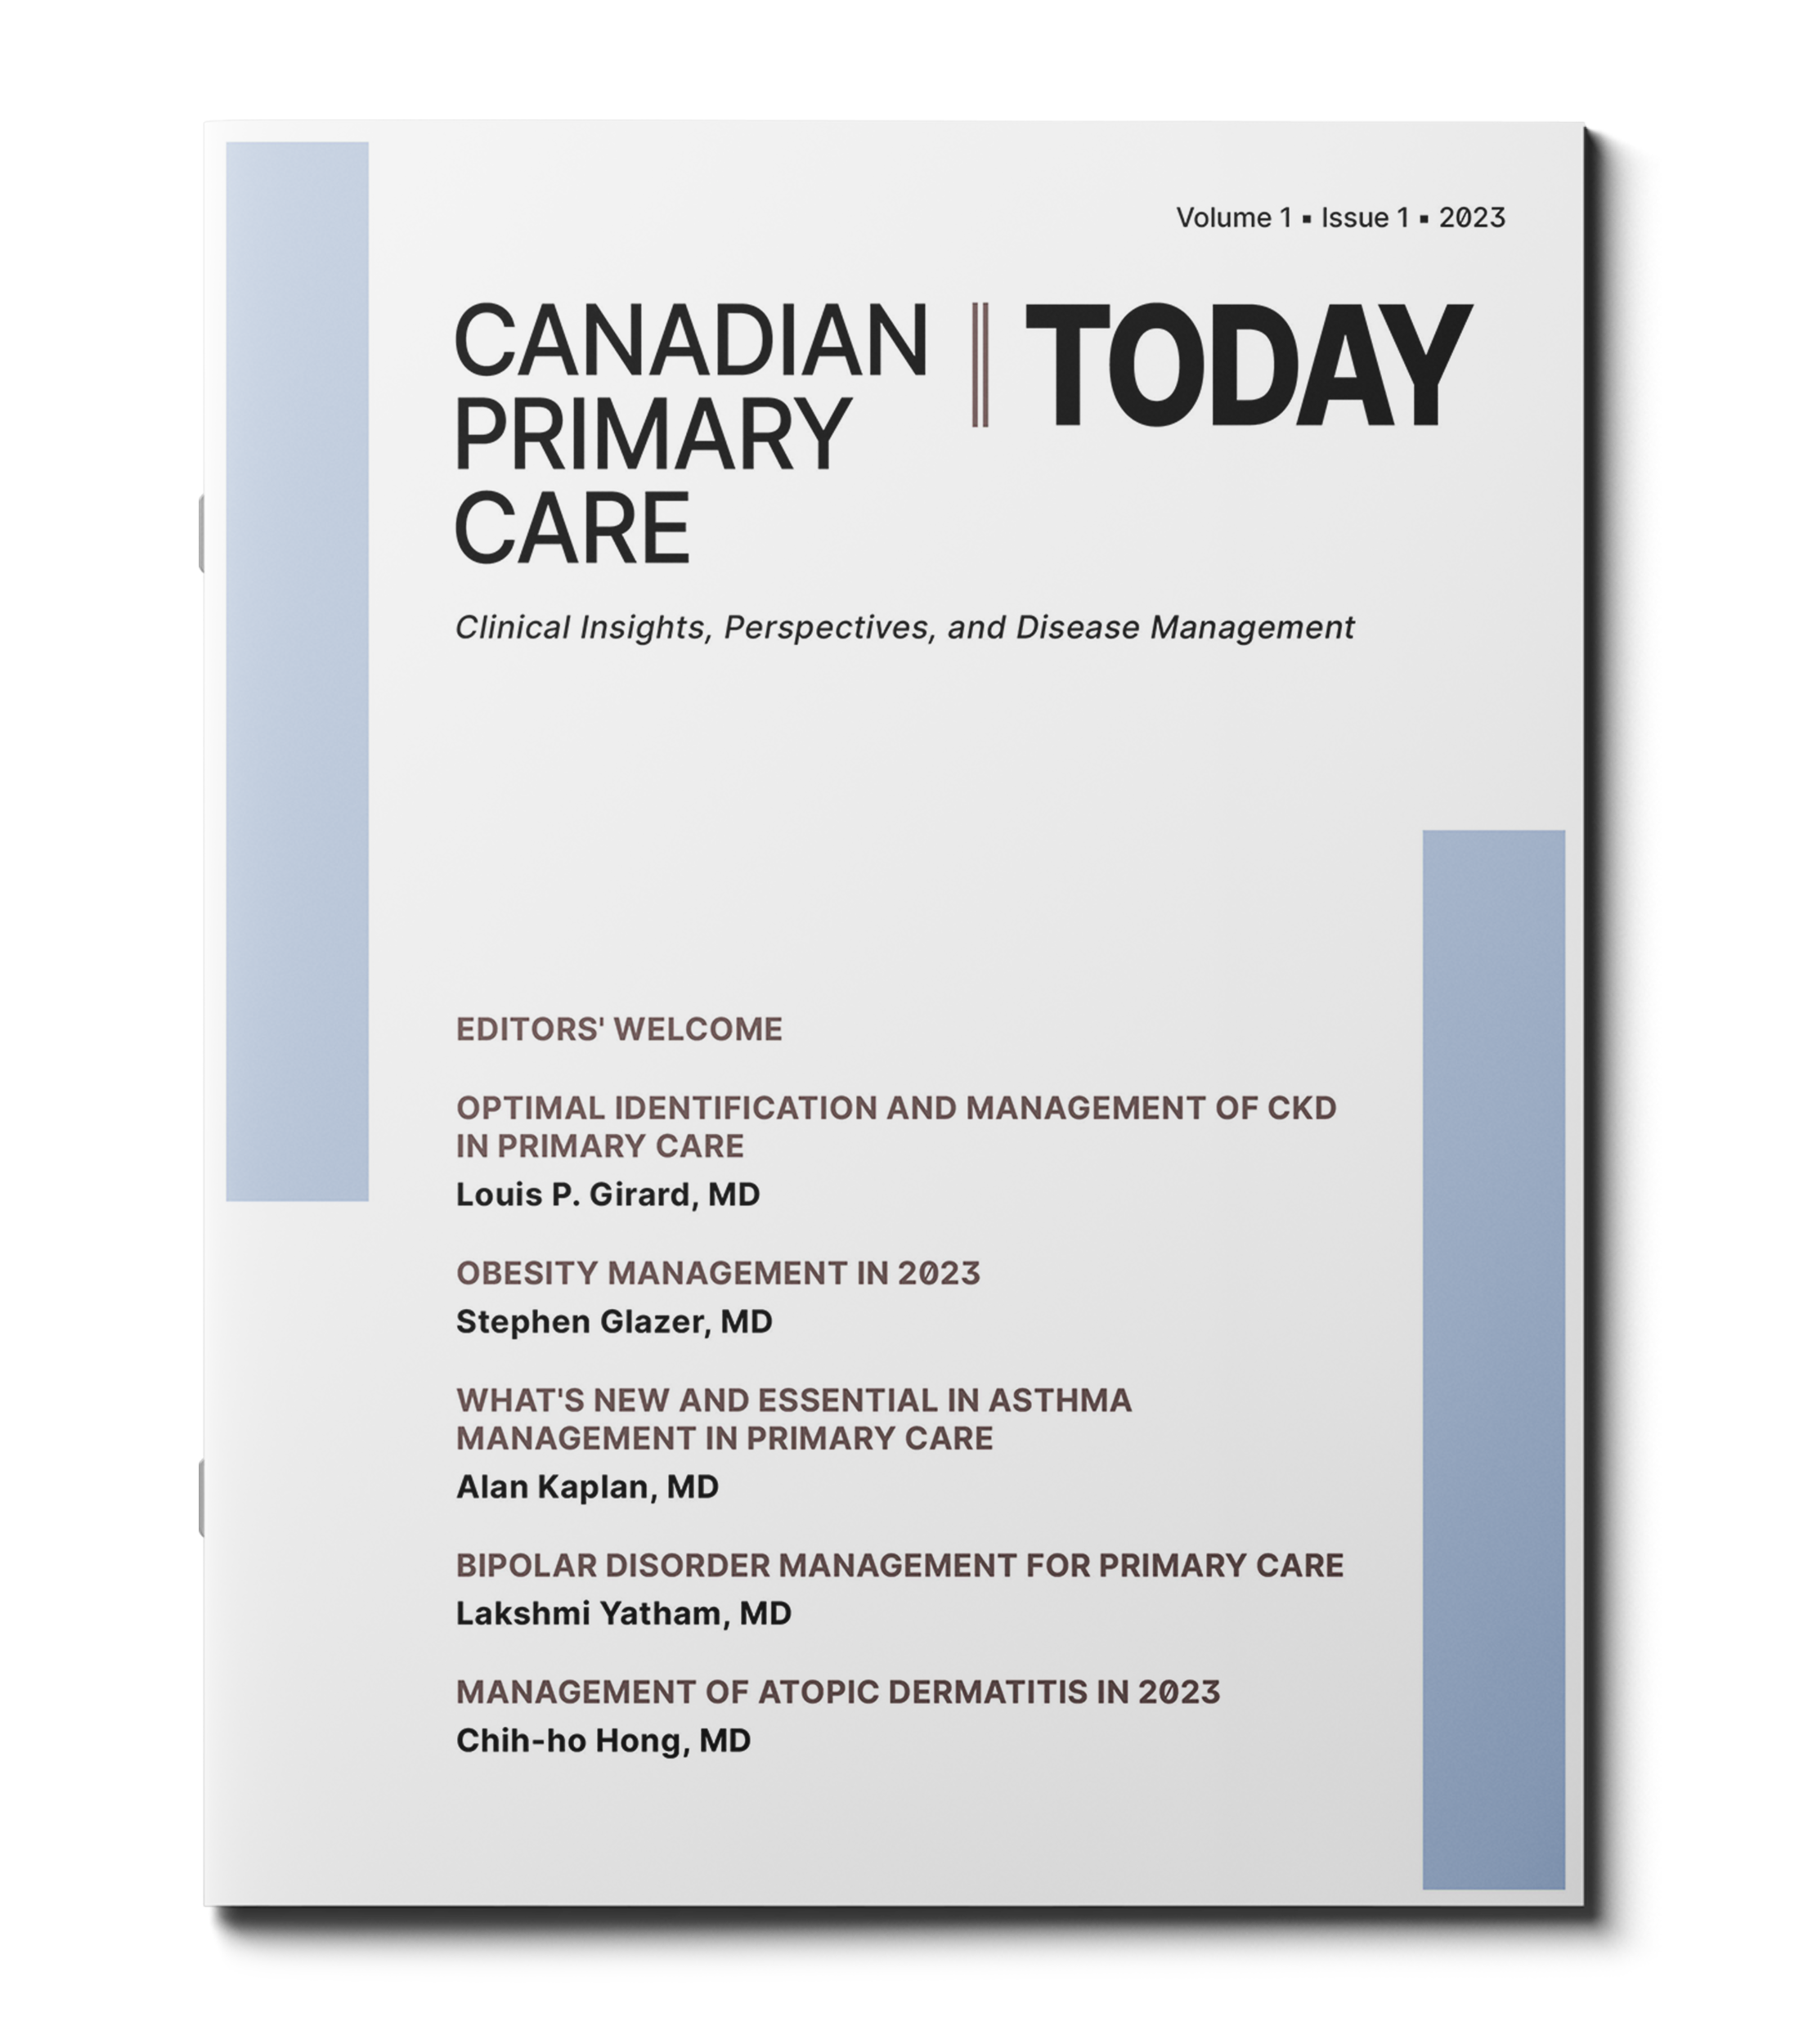 Canadian Primary Care Today cover